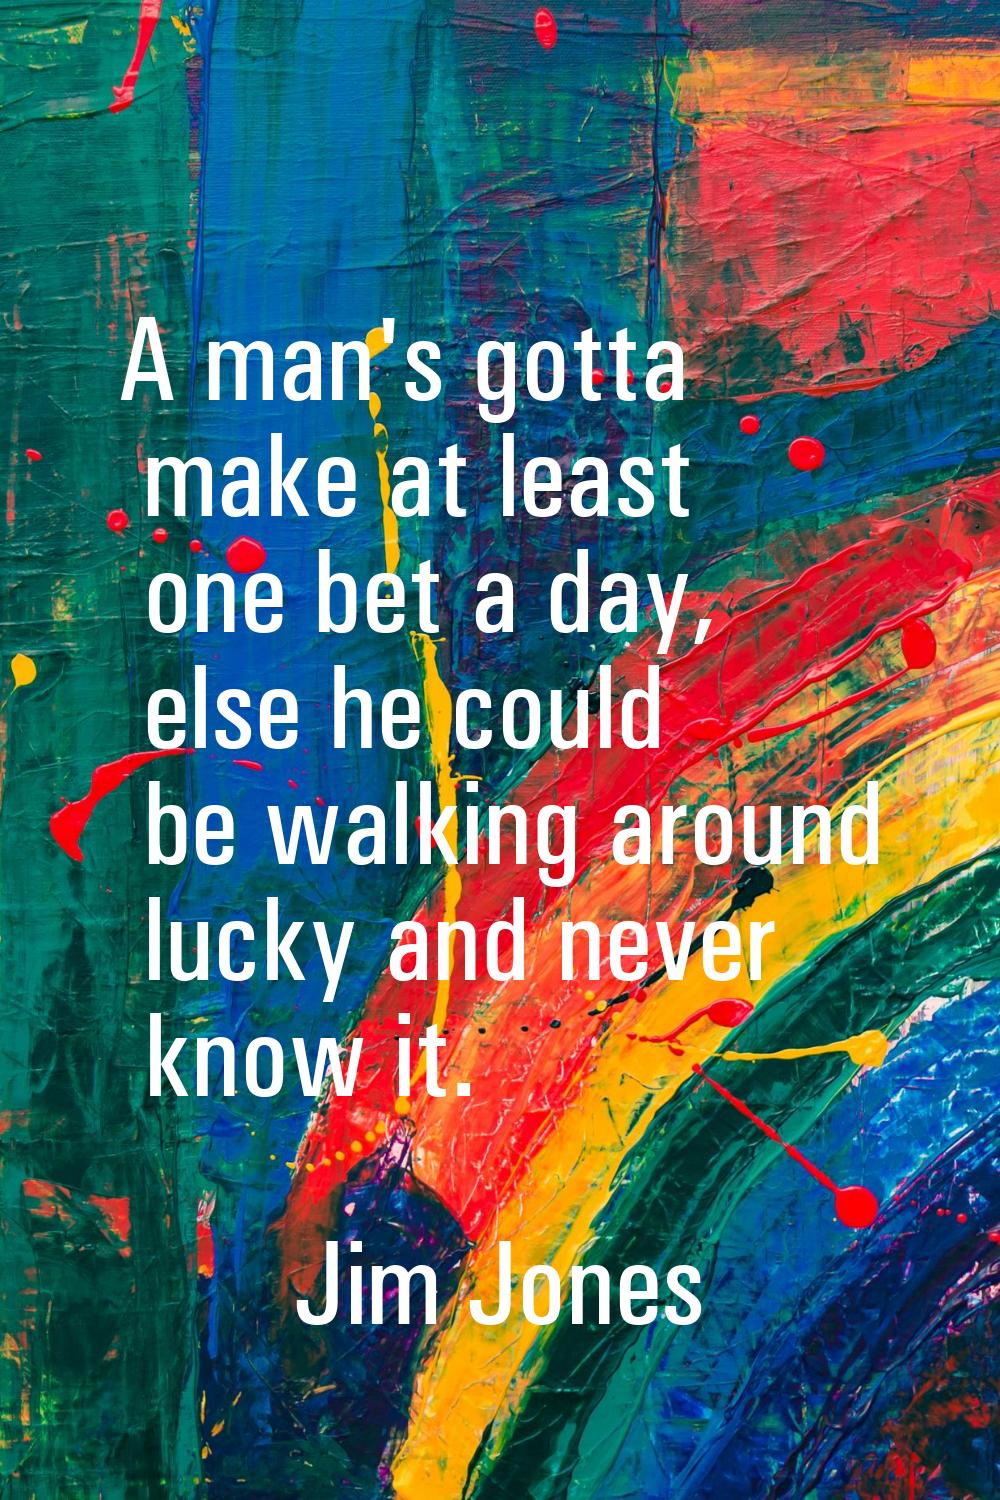 A man's gotta make at least one bet a day, else he could be walking around lucky and never know it.